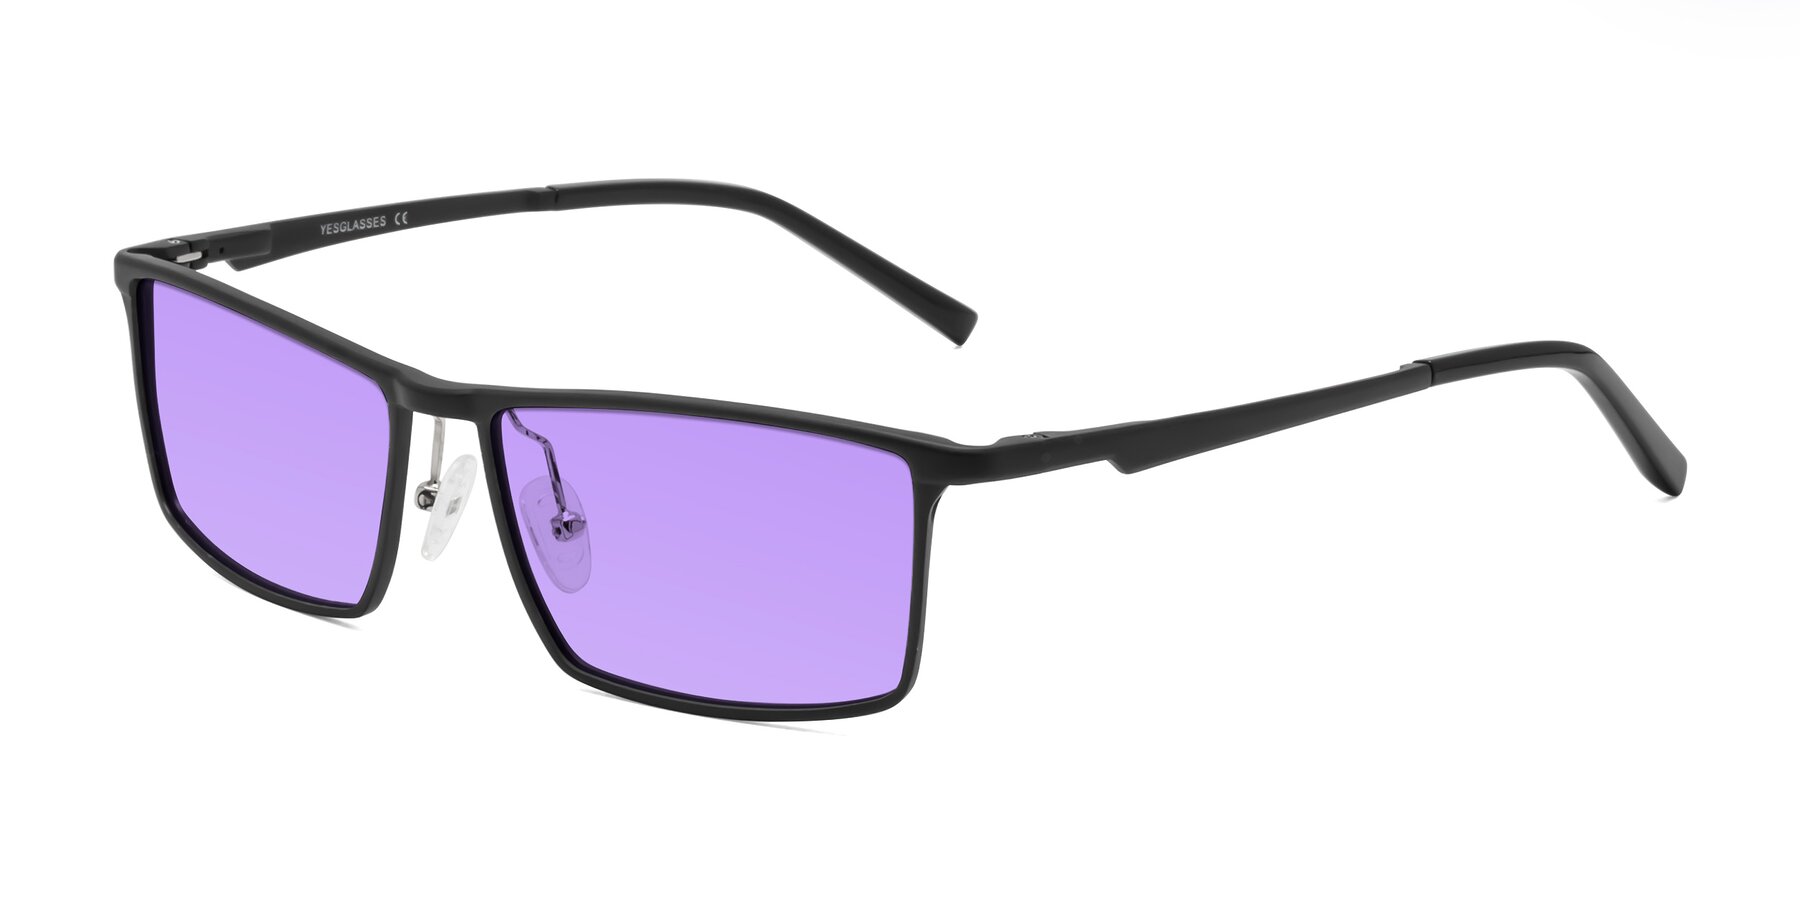 Angle of CX6330 in Black with Medium Purple Tinted Lenses